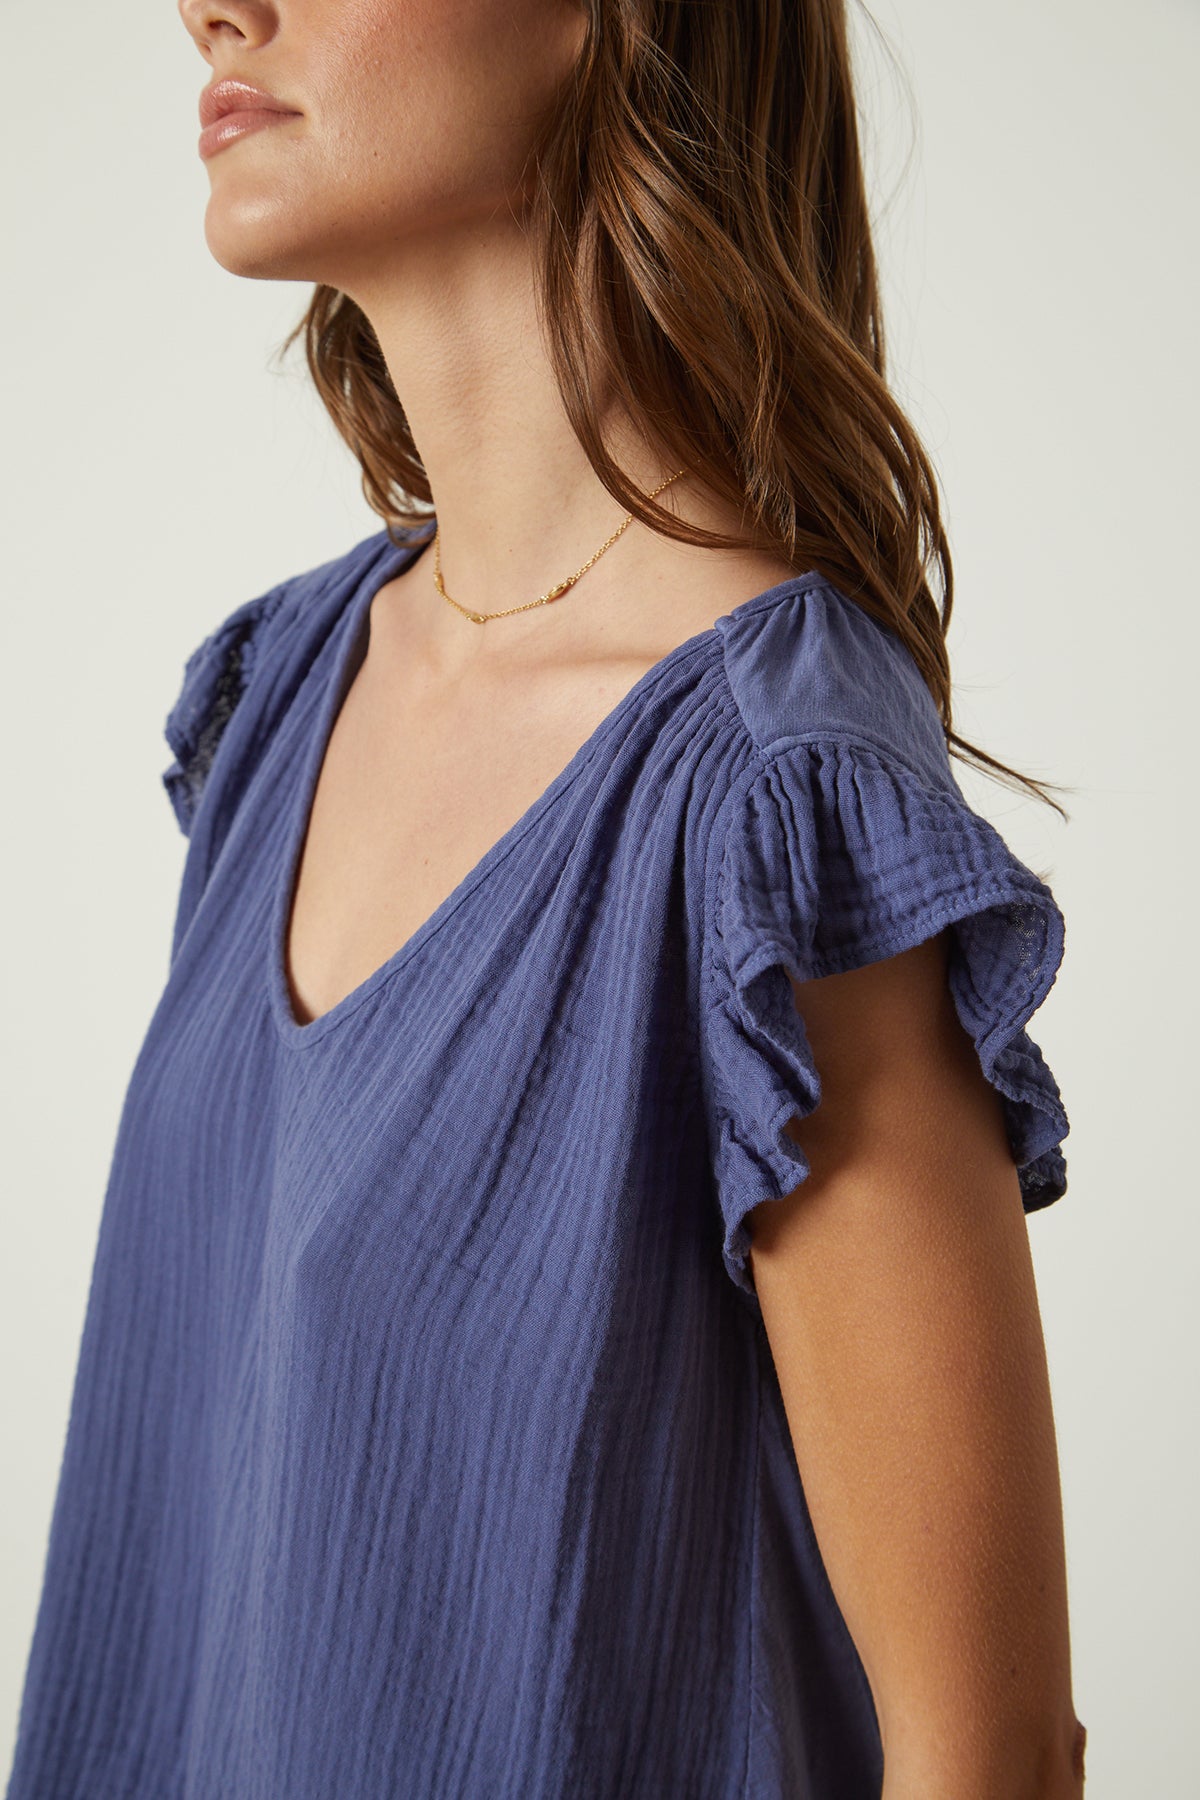   The model is wearing a Velvet by Graham & Spencer REMI RUFFLE SLEEVE TOP. 